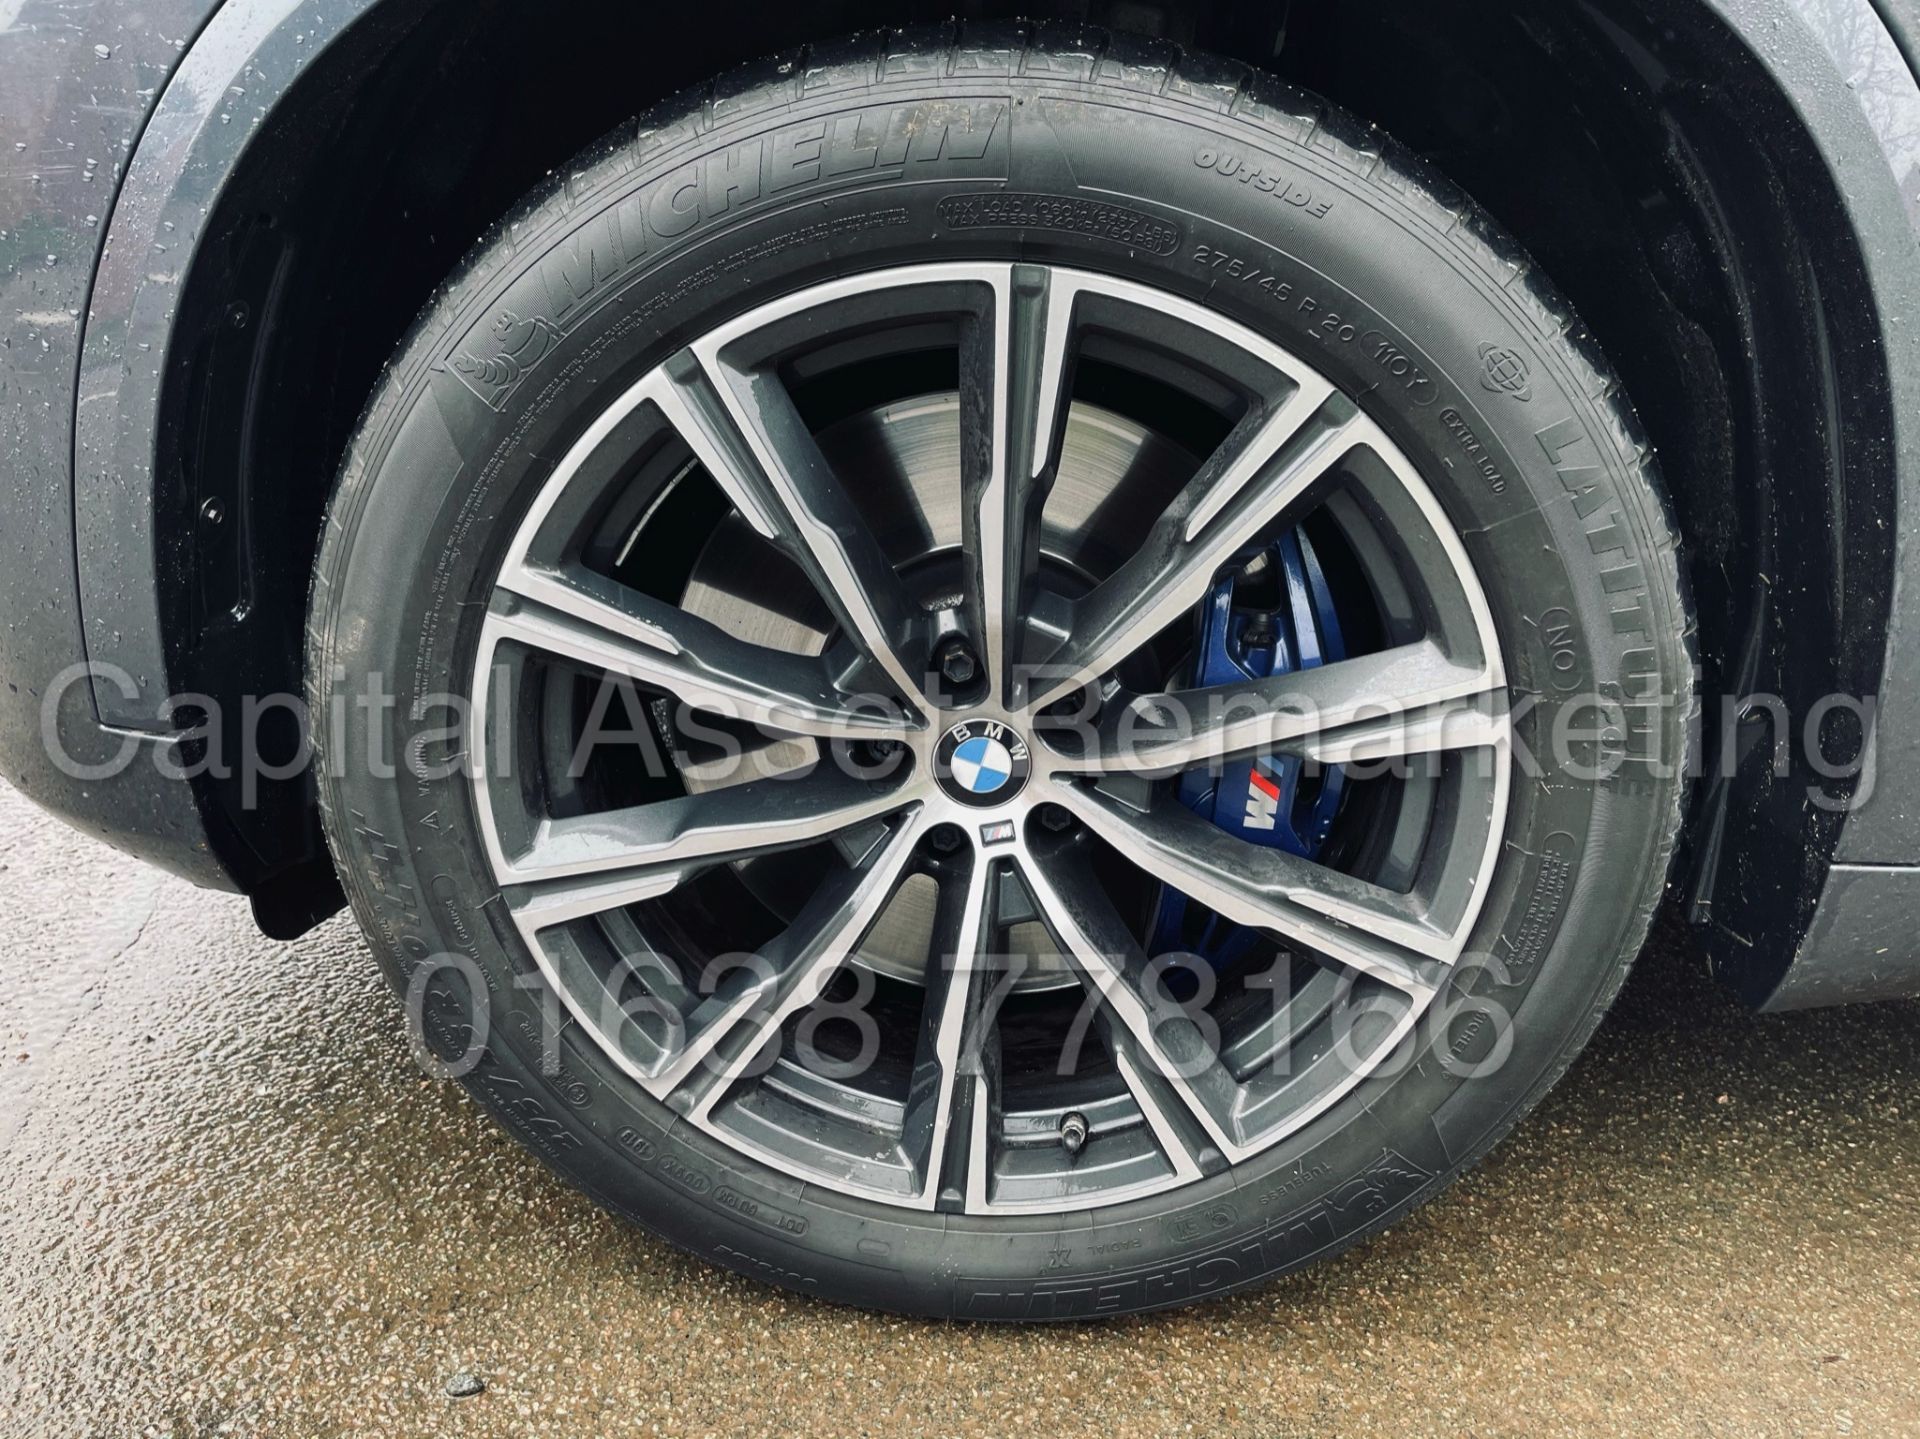 (On Sale) BMW X5 *M SPORT* X-DRIVE *7 SEATER SUV* (2019 - EURO 6) '3.0 DIESEL - AUTO' *PAN ROOF* - Image 19 of 70